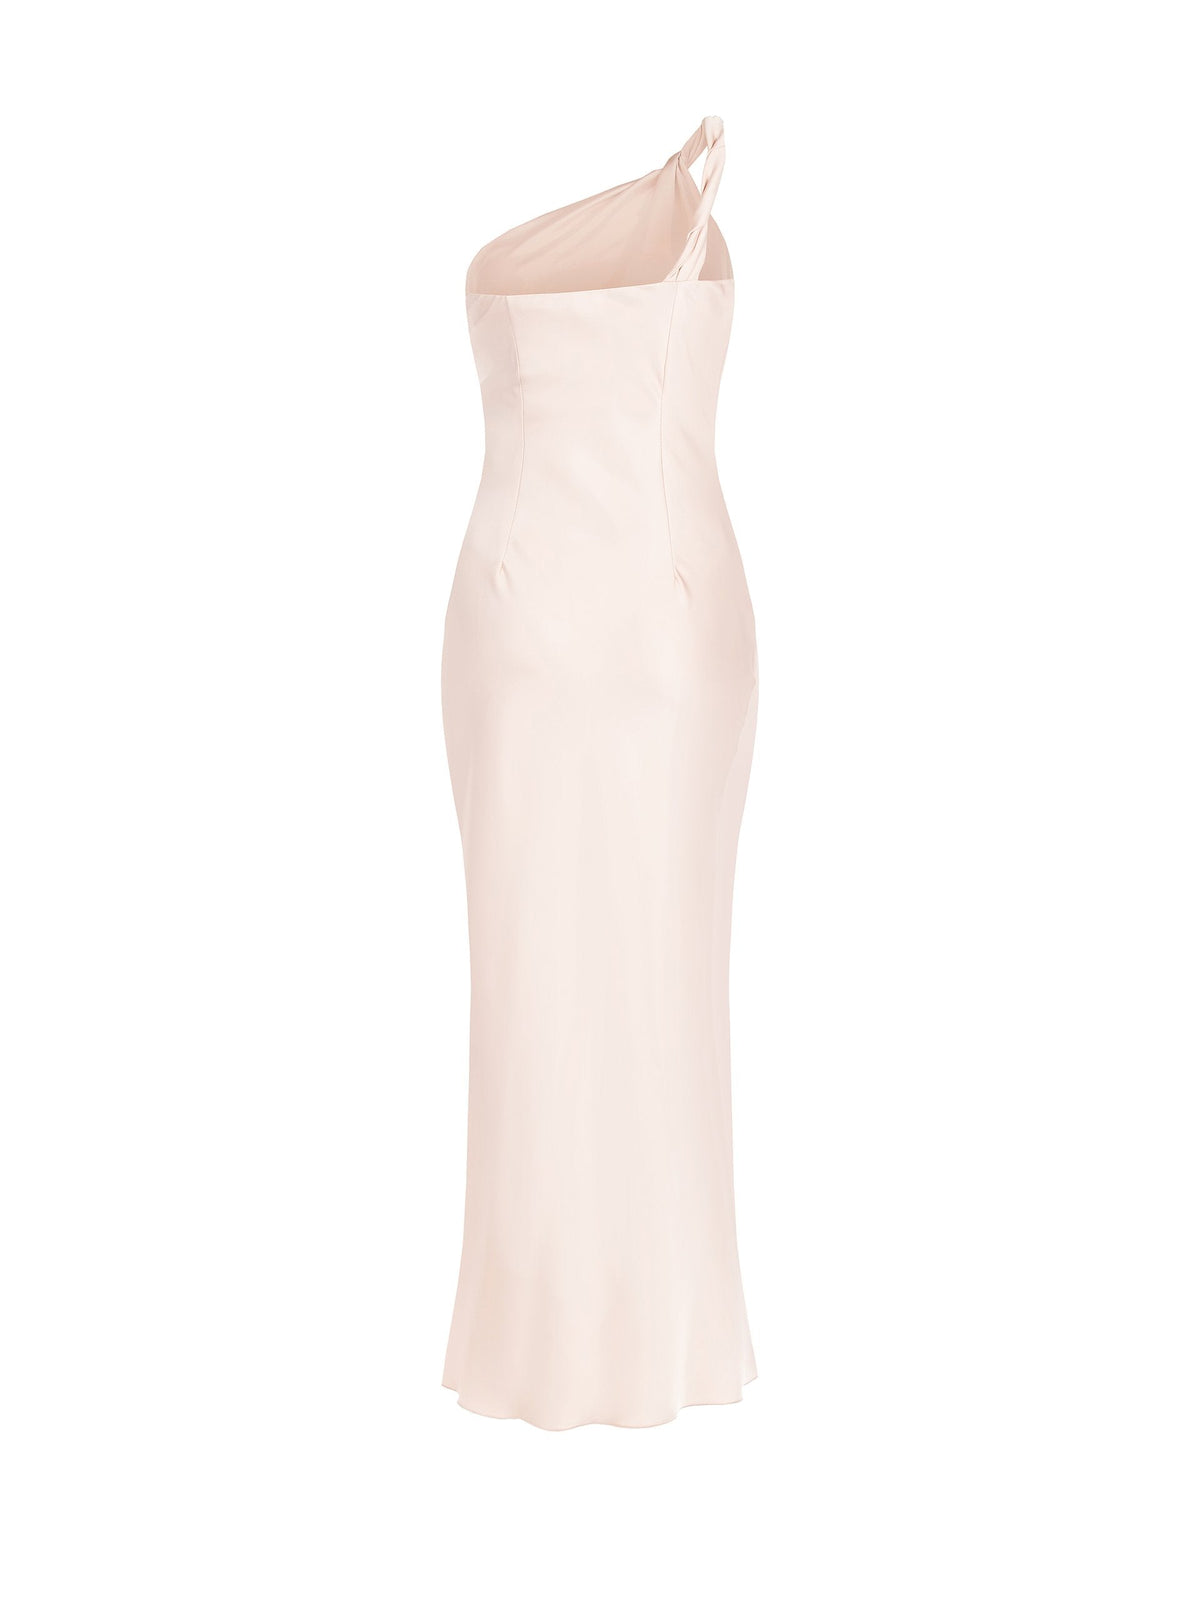 Long Dress with Satin Slip with a Single Rolled Shoulder Strap